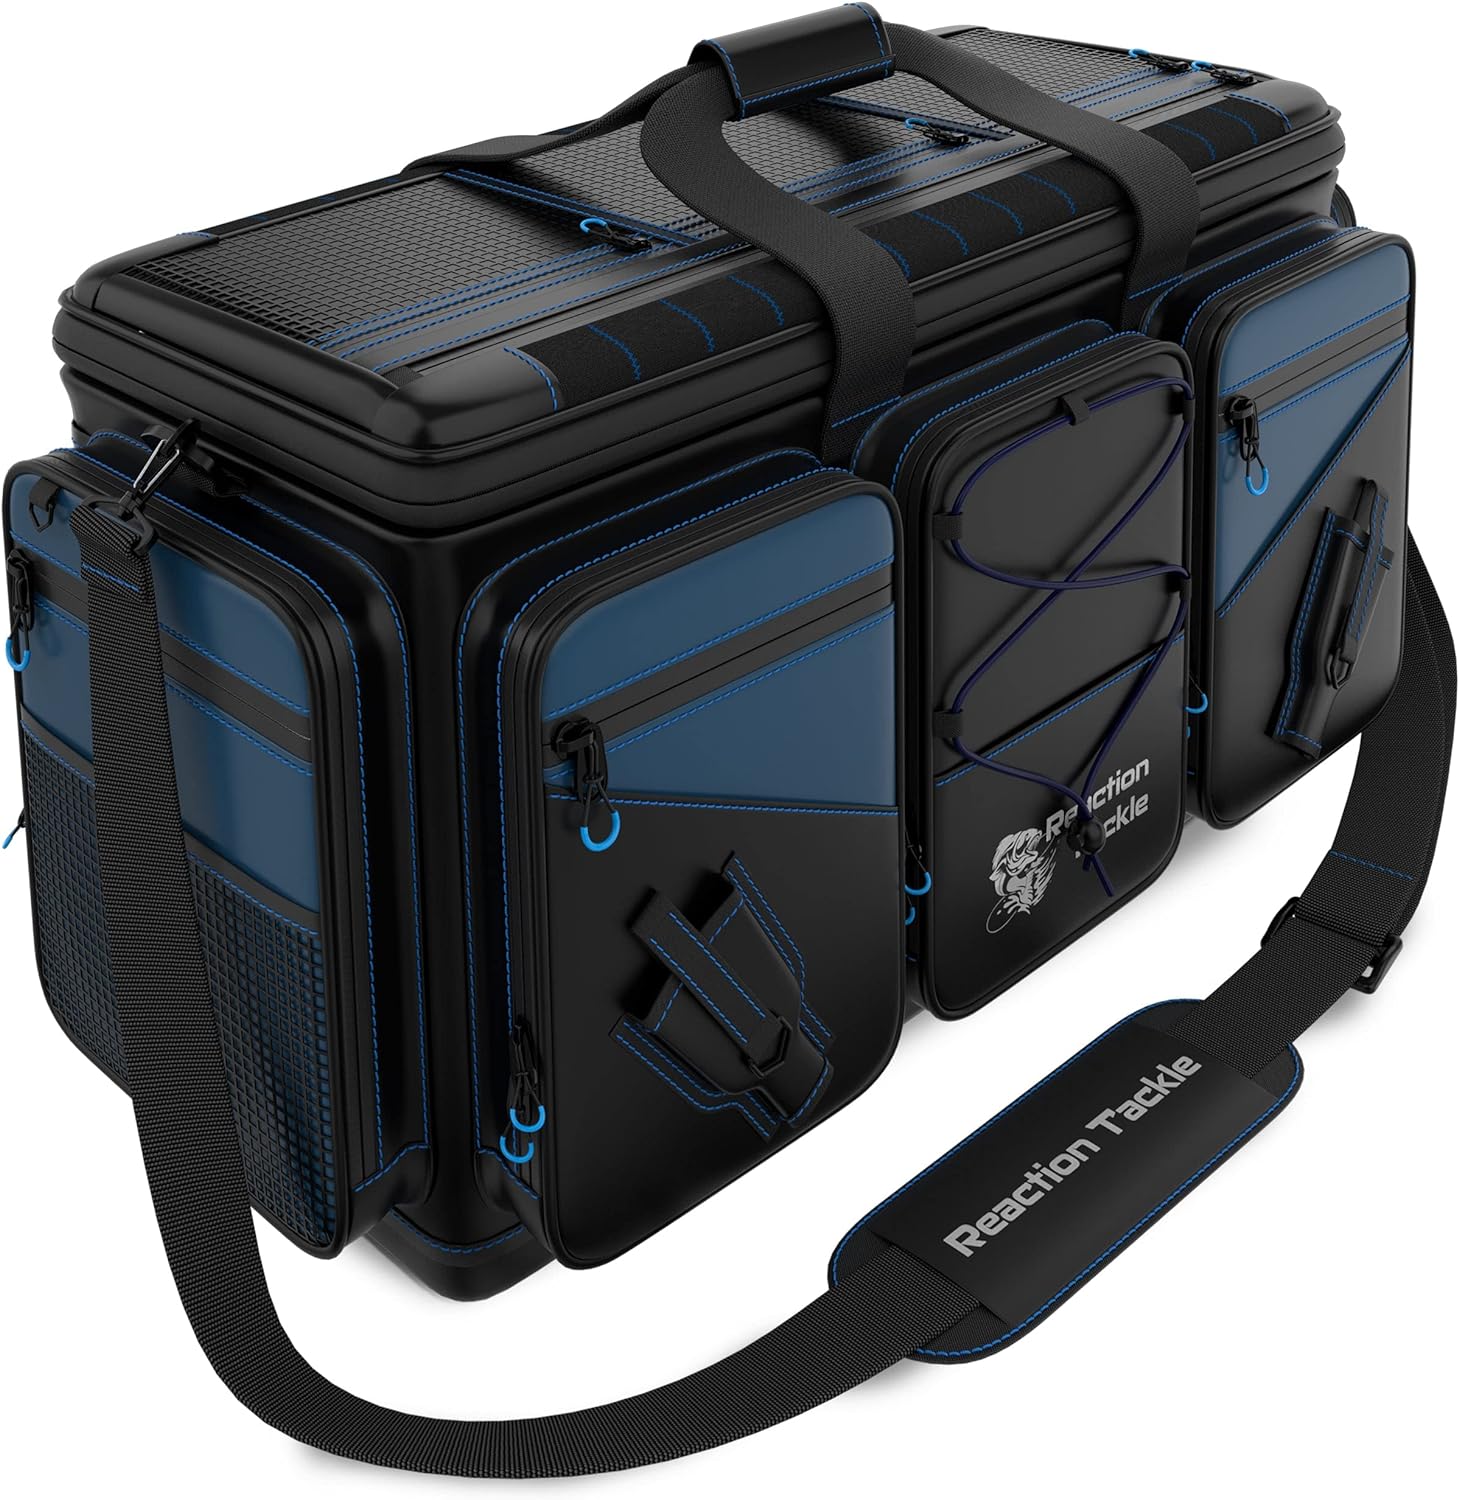 The Reaction Tackle Fishing Bag Might Be the Only Tackle Box You